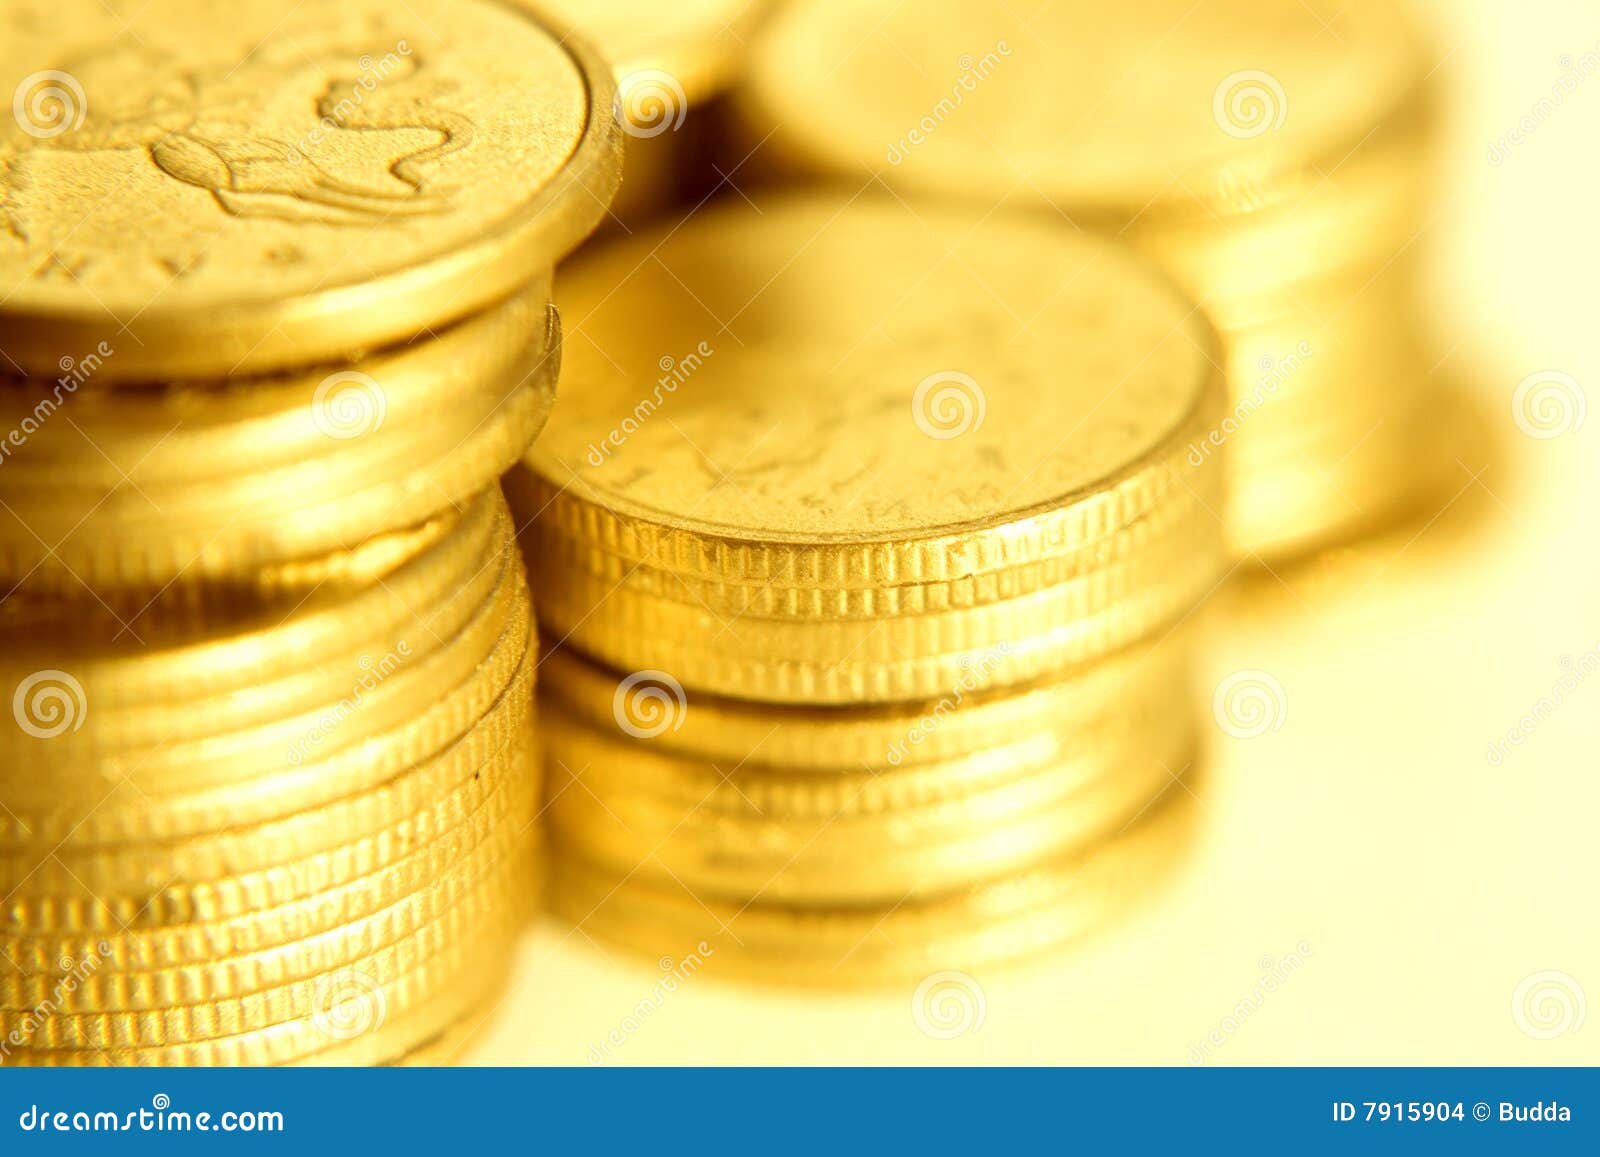 gold coins close-up